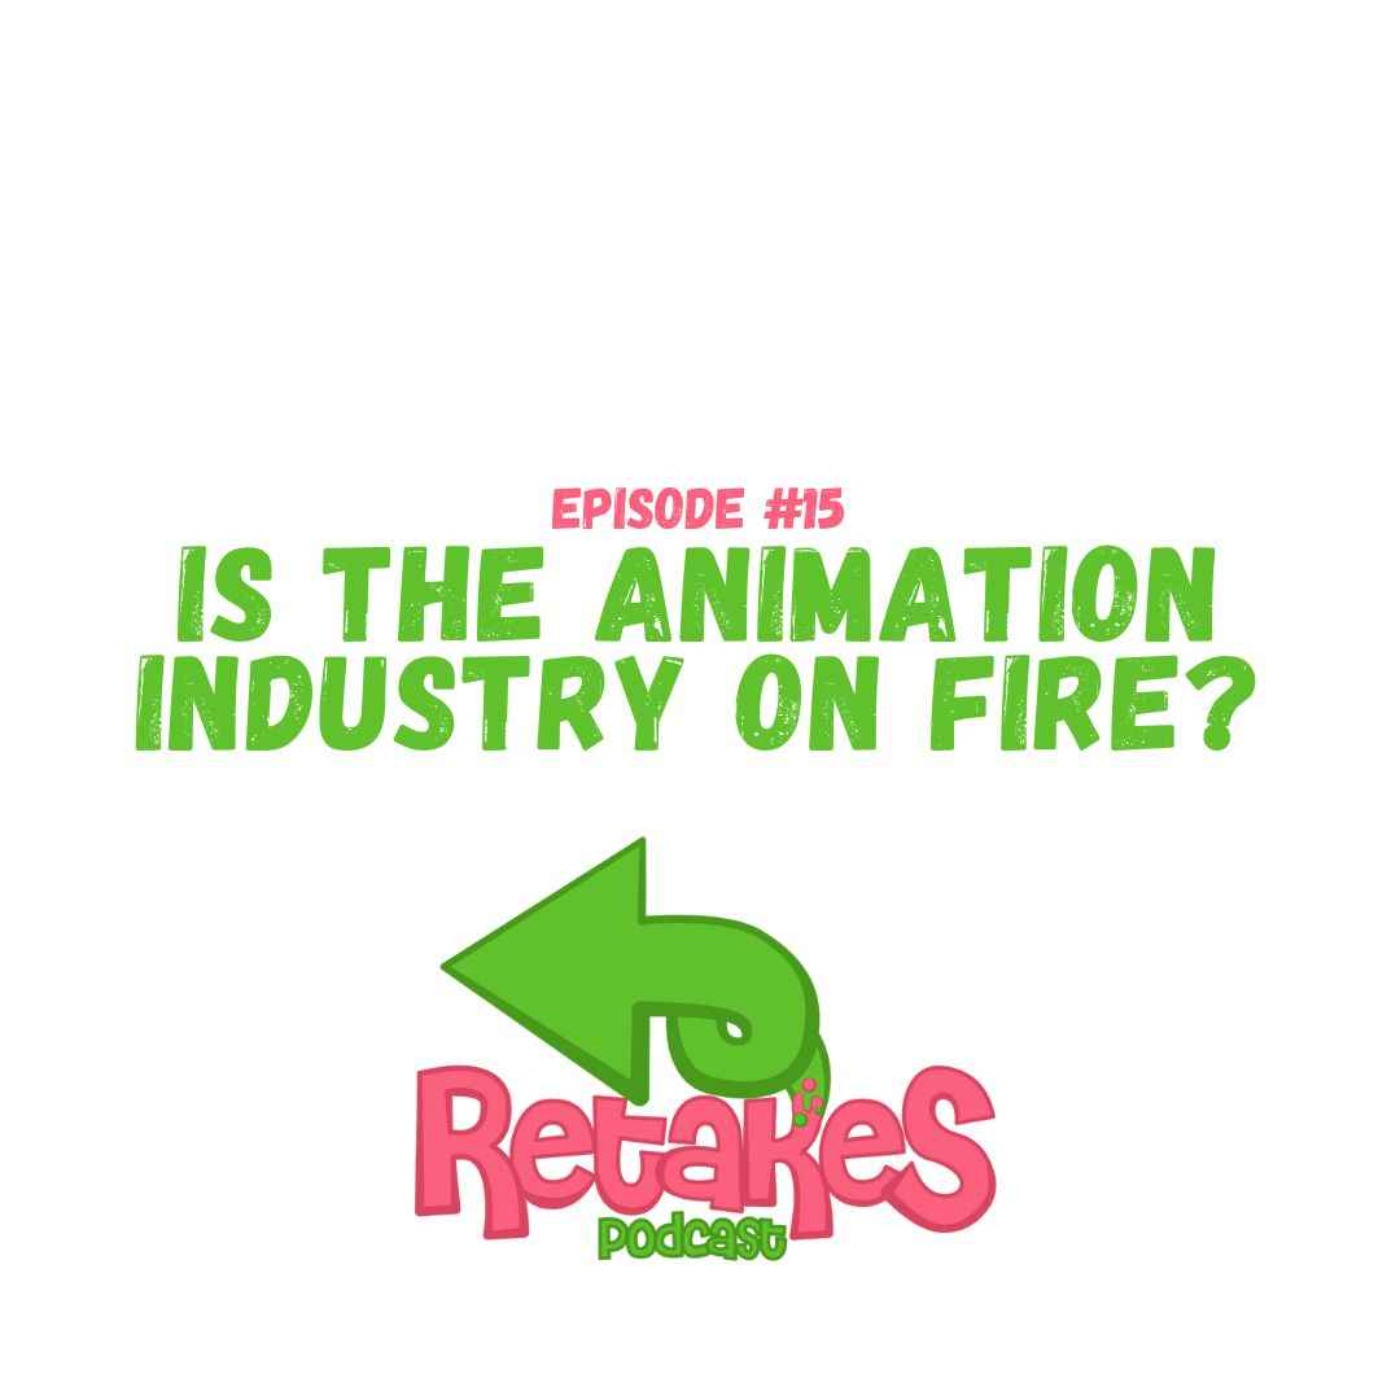 Is the Animation Industry on fire?